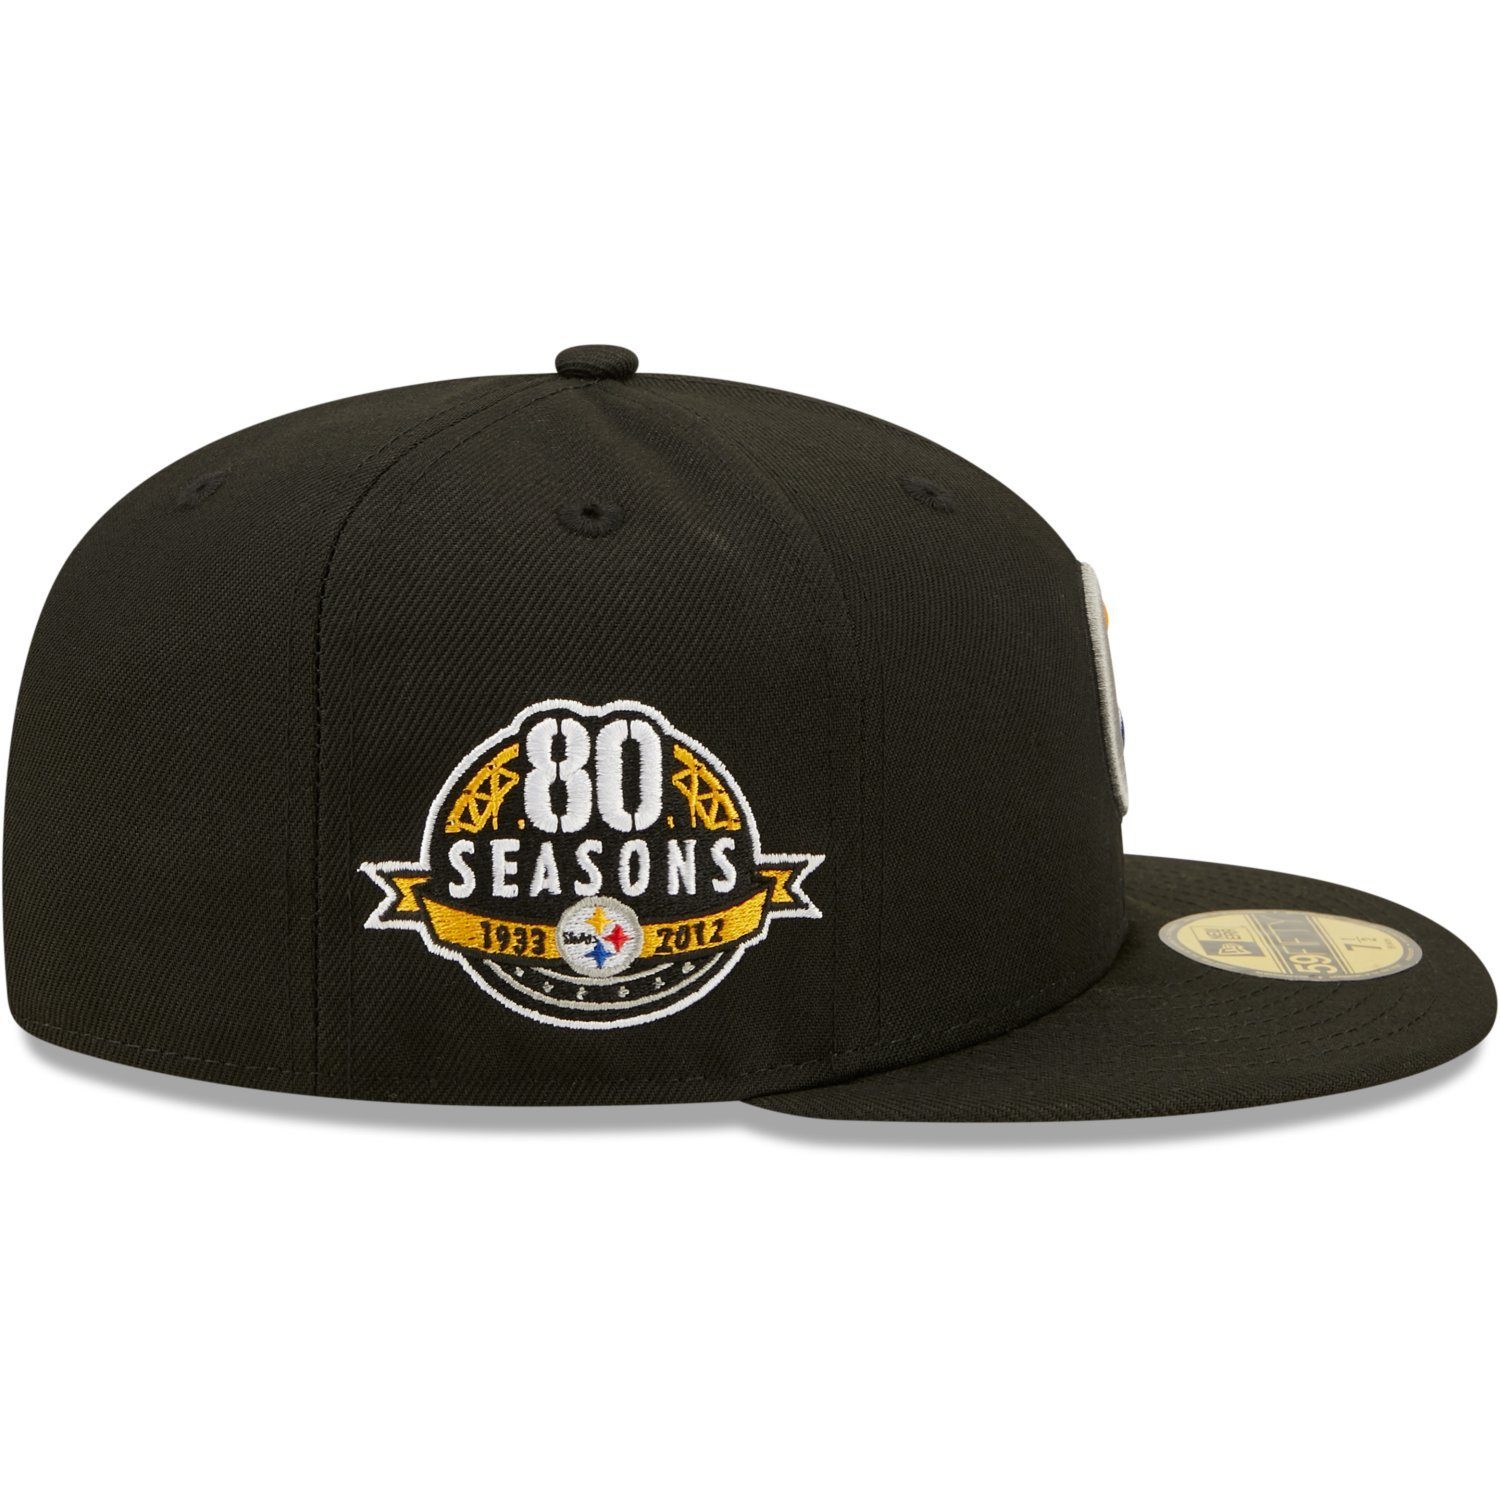 New Steelers Pittsburgh Fitted 59Fifty Cap 80 Era Seasons